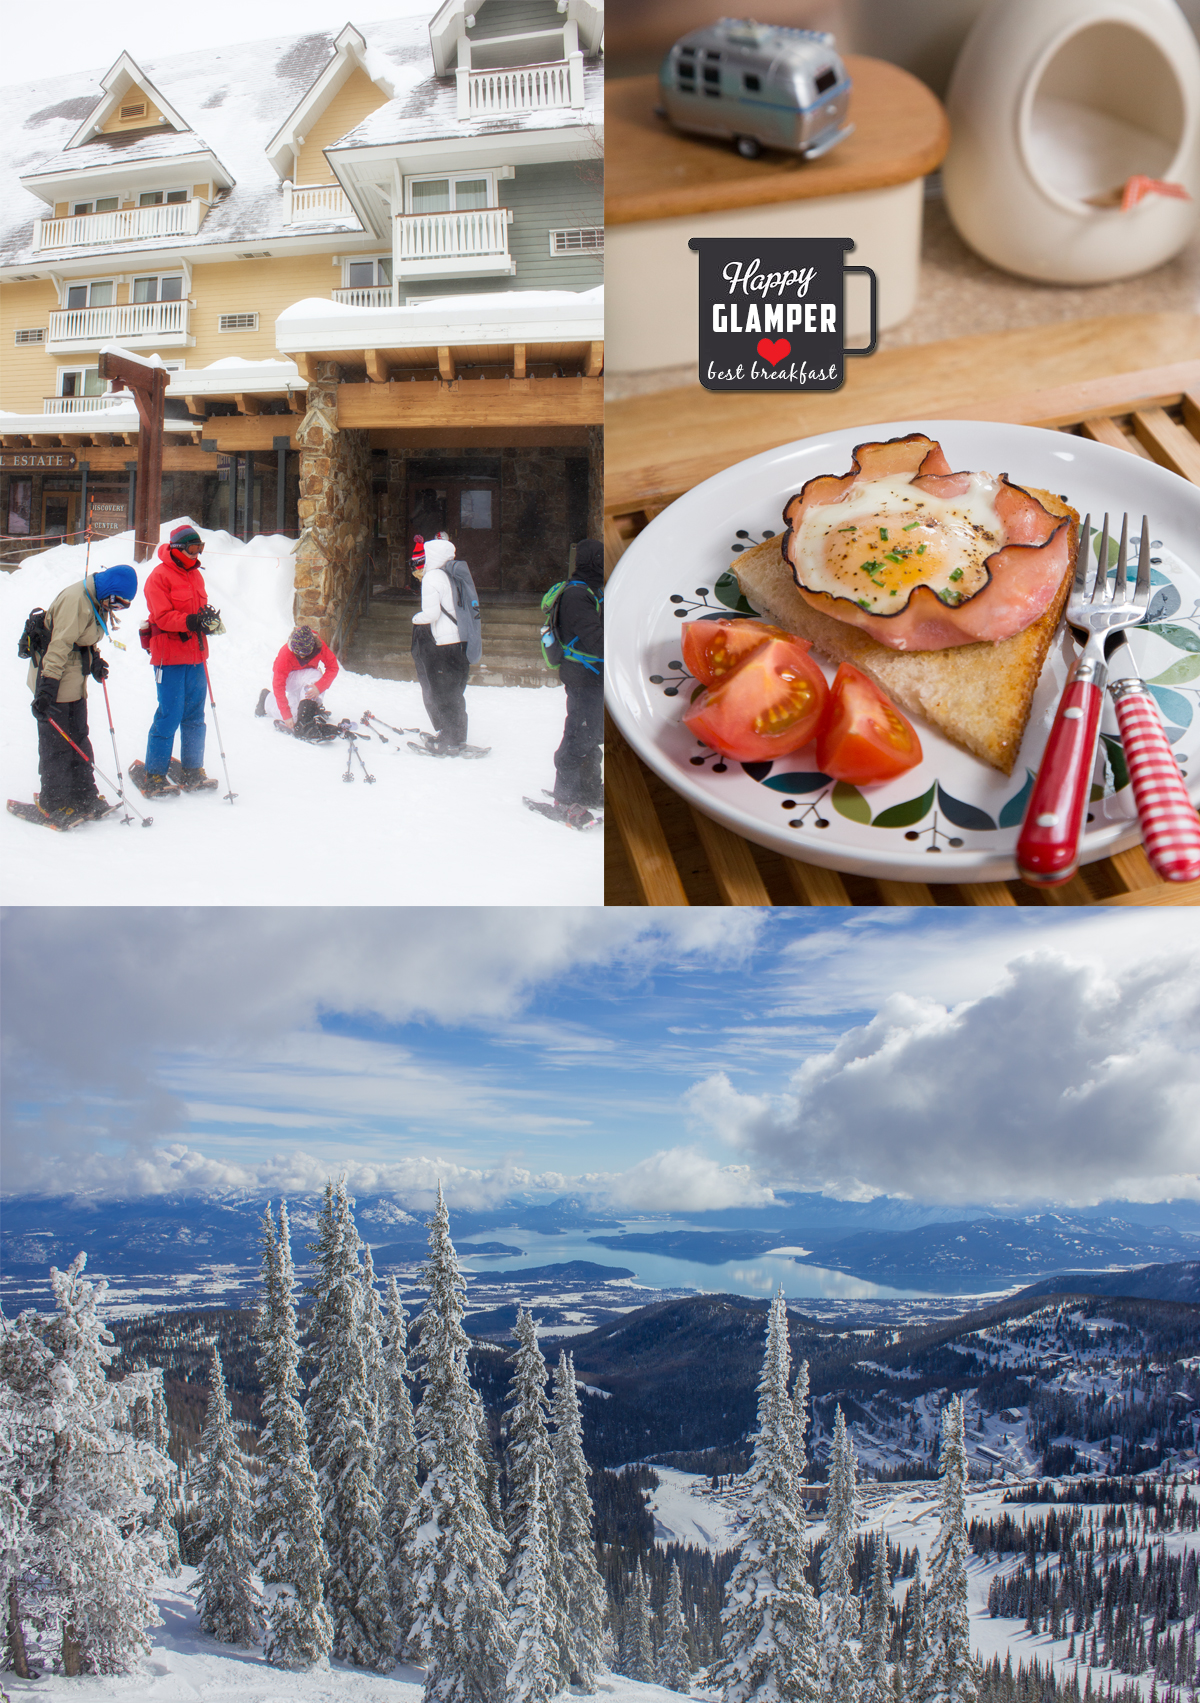 Guided Snowshoe Hike and Fondue Dinner at Schweitzer Mountain Resort in Idaho via J5MM.com